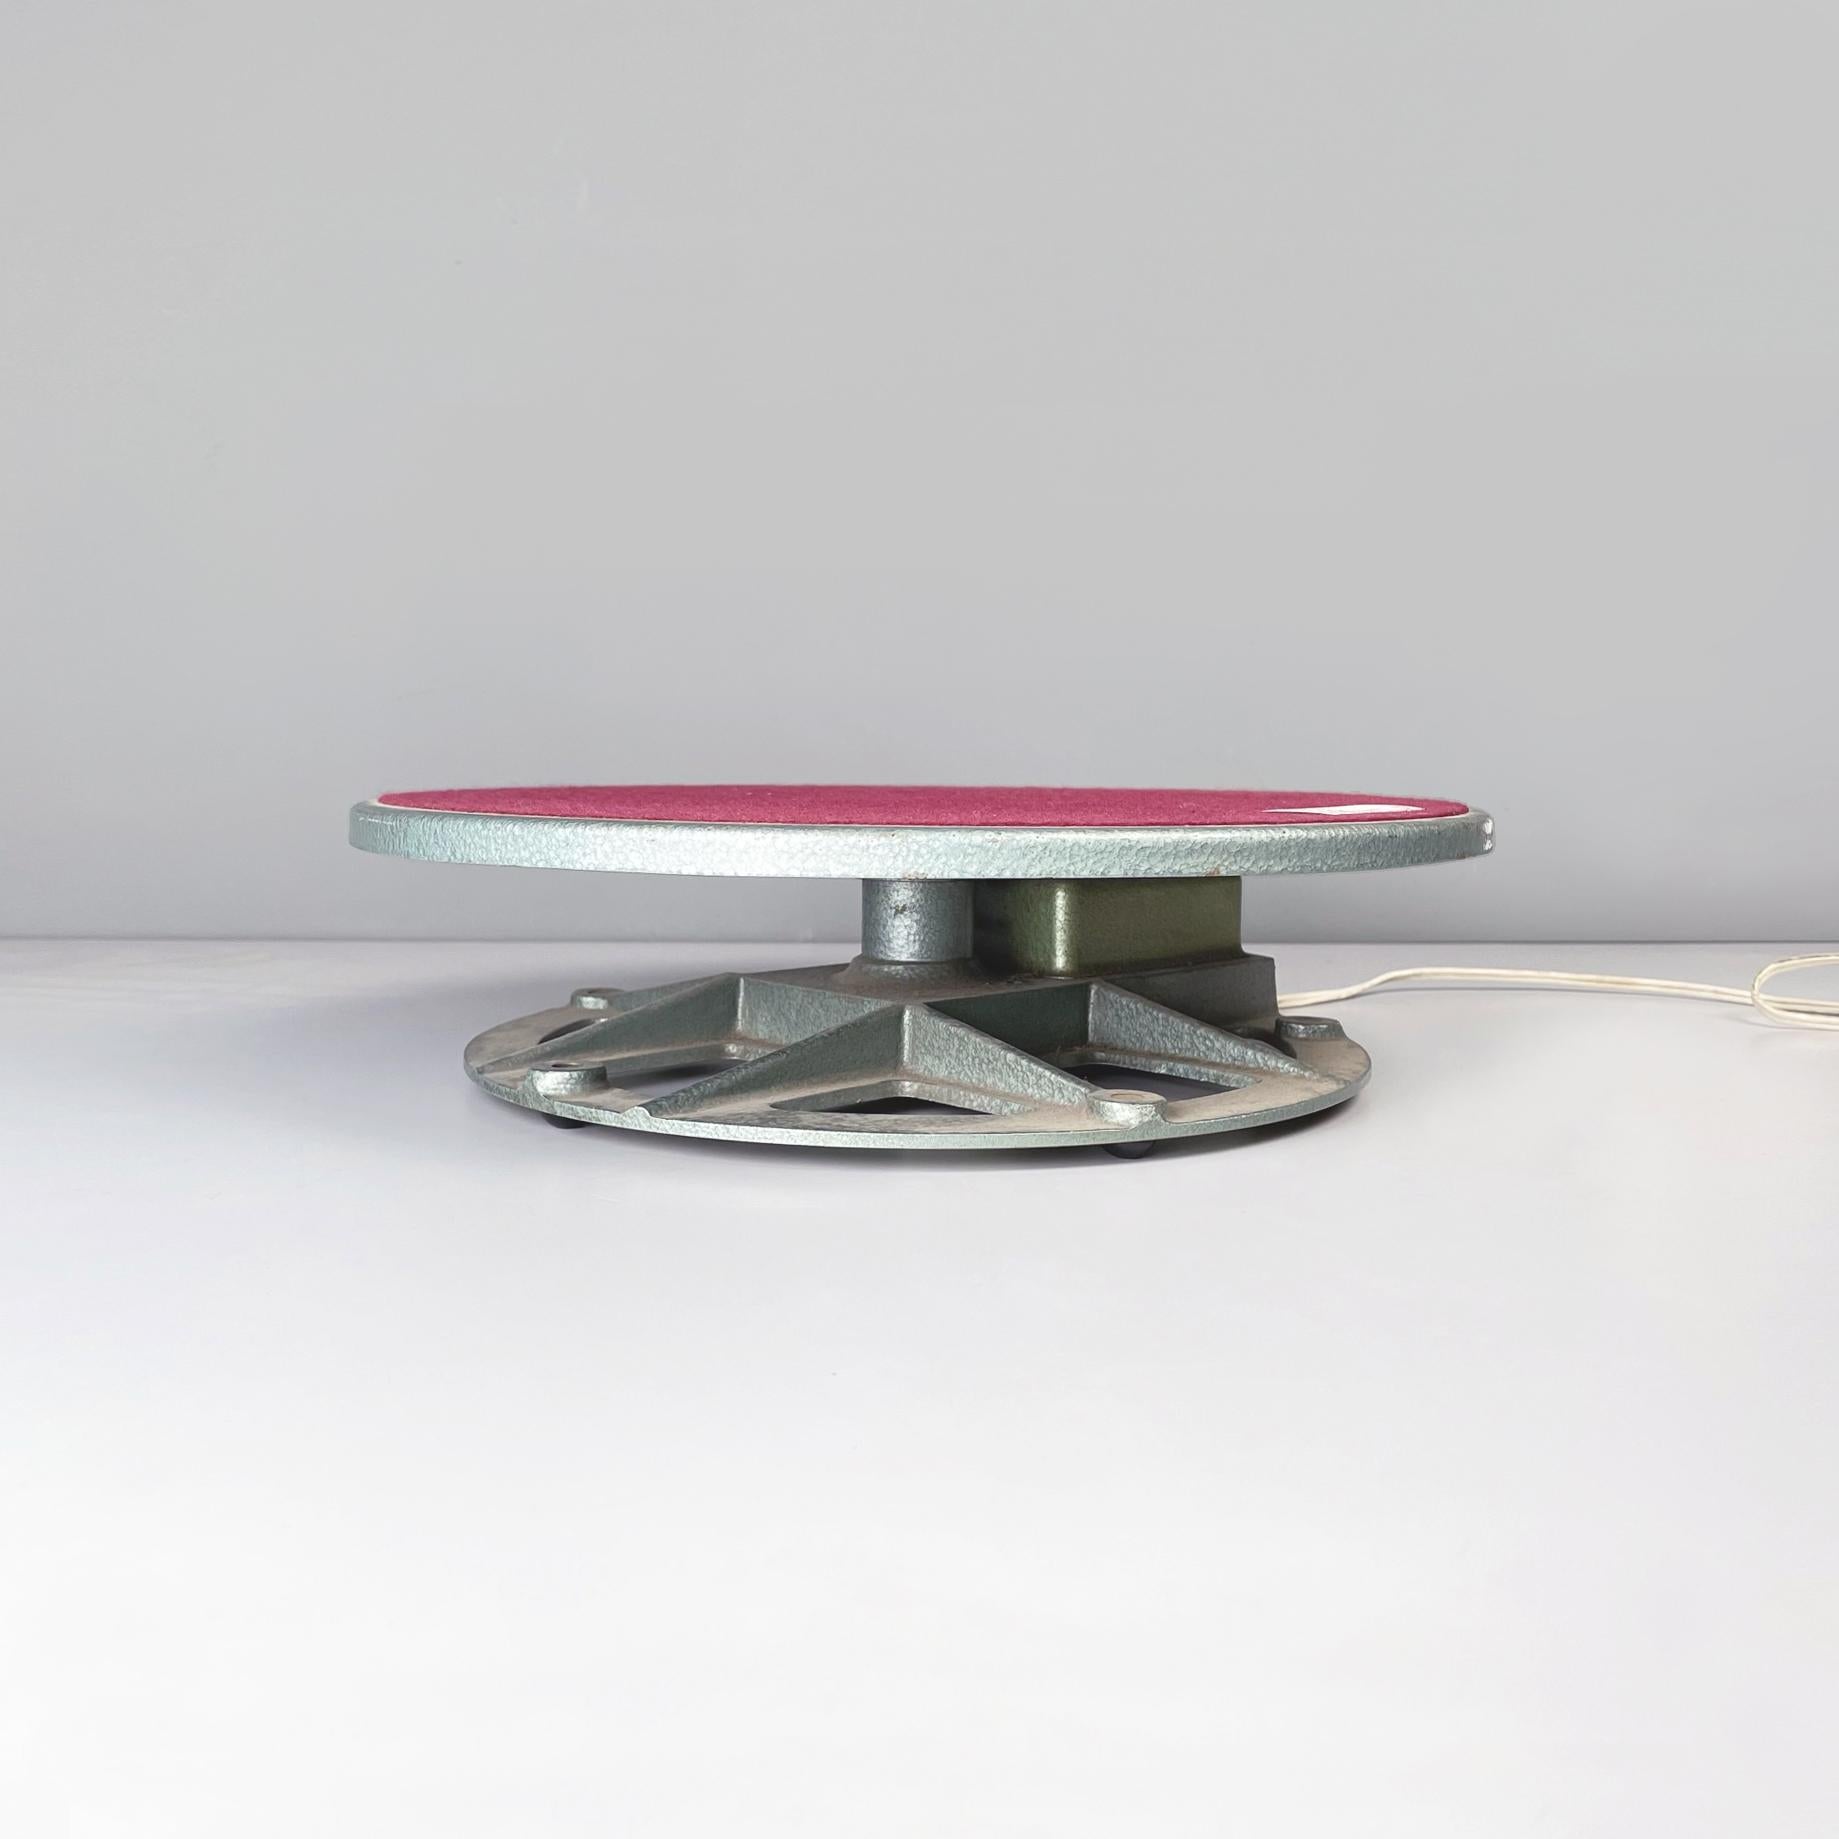 Italian modern Rotating display stand in metal and red fabric, 1970s.
Rotating table display stand in metal and red fabric. The round shelf has a metal structure with a burgundy red fabric in the centre. The structure has an internal mechanism,